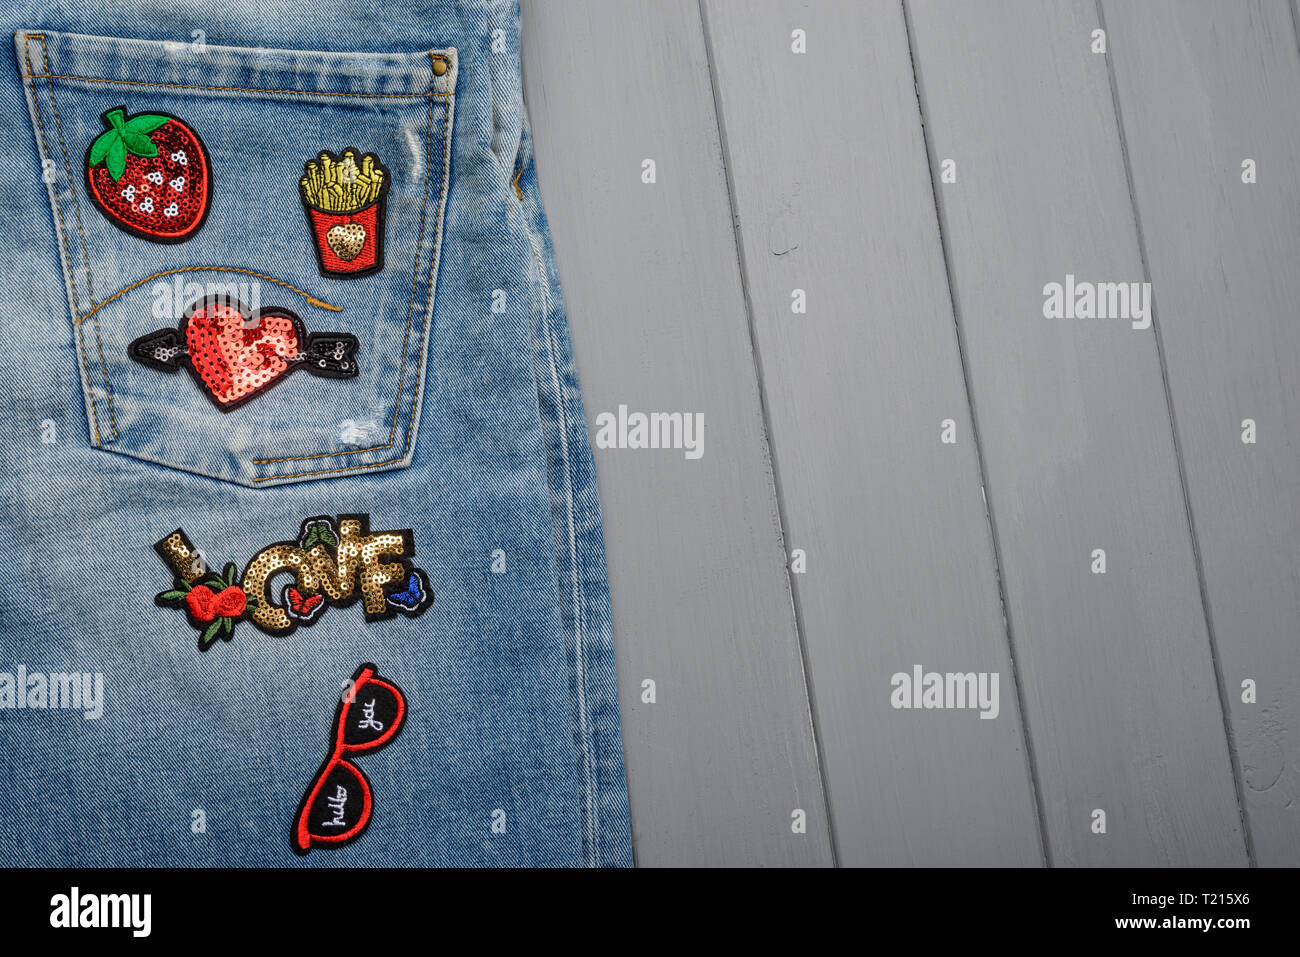 Repaired jeans with various patches Stock Photo